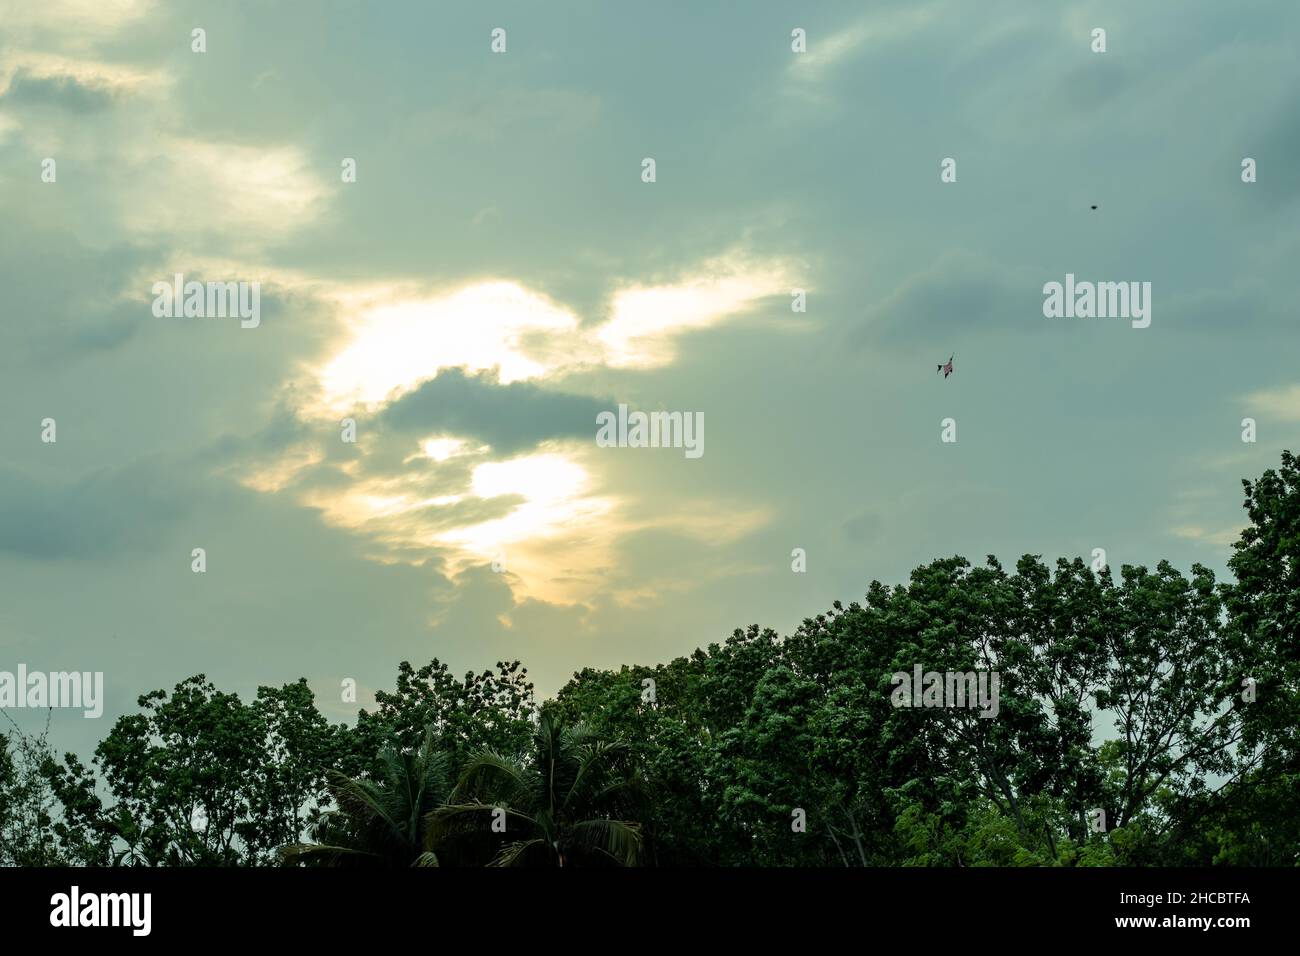 Green leaves under blue sky and white clouds during daytime. The sky with green stalks and black clouds behind the leaves is a beautiful moment Stock Photo